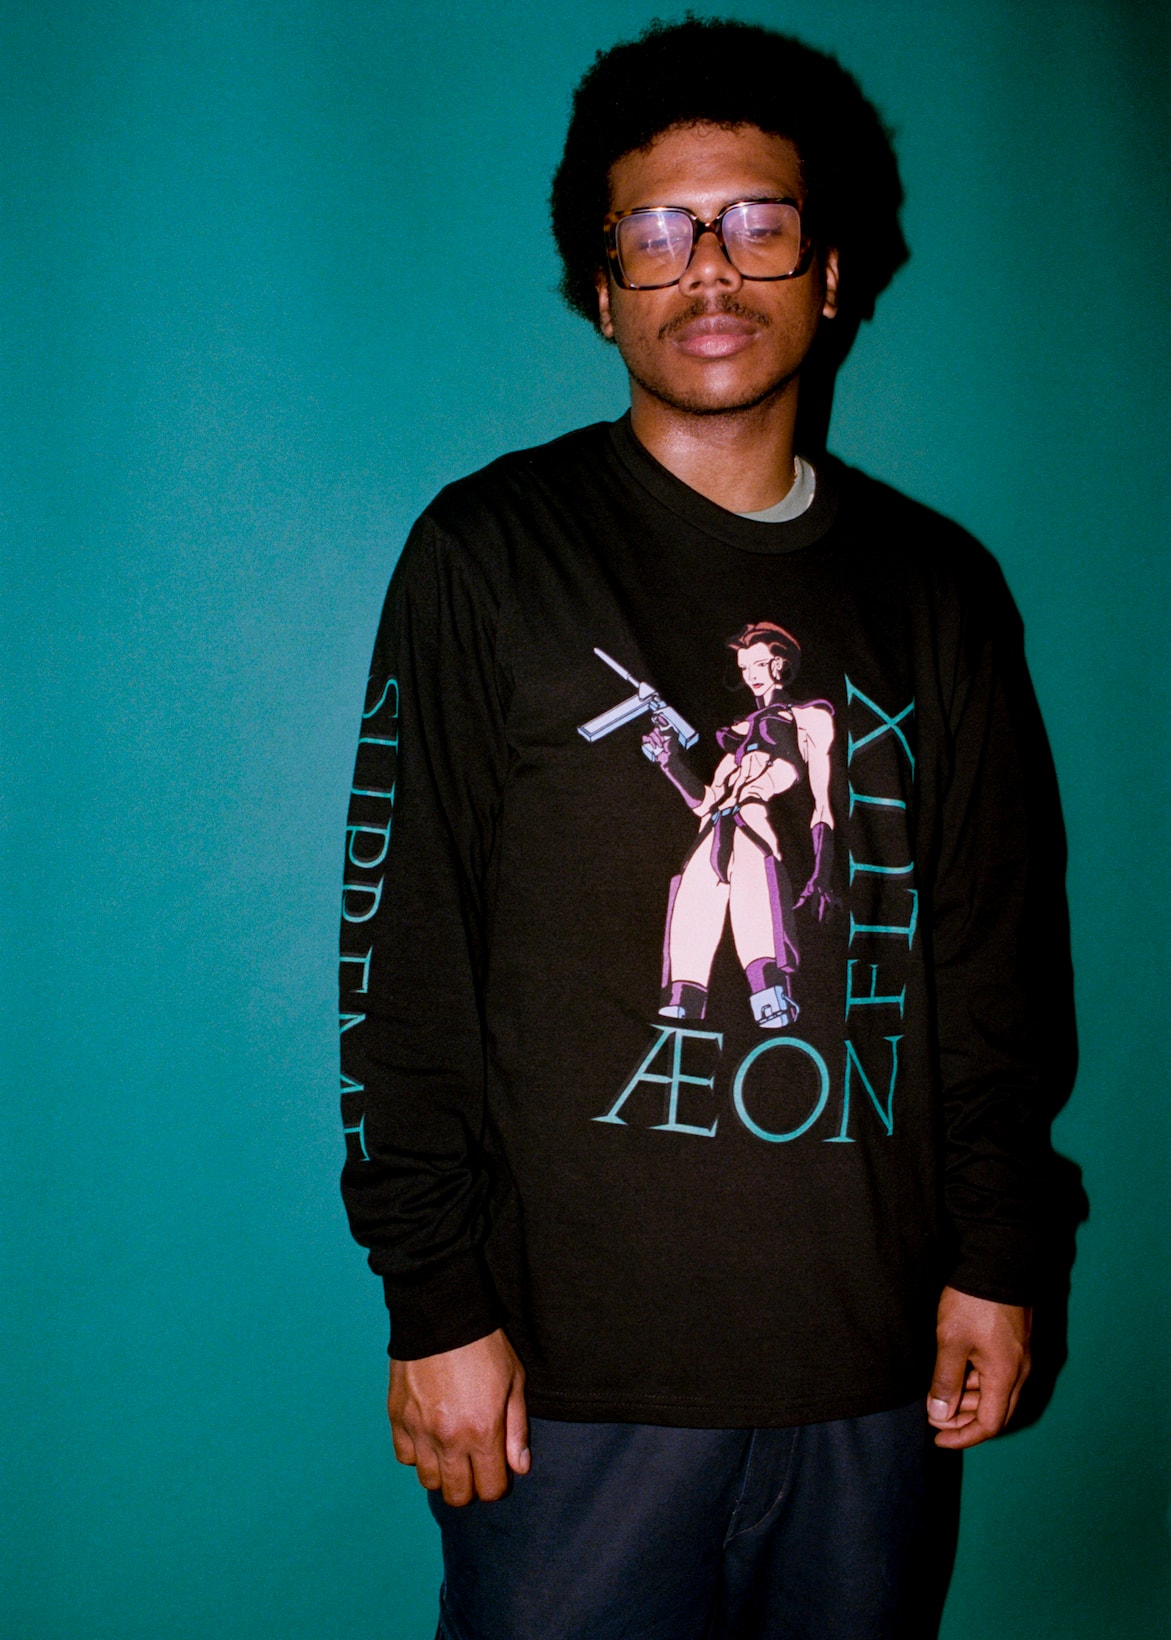 Aeon Flux Supreme Spring 2022 Collaboration Collection Hoodies Jackets